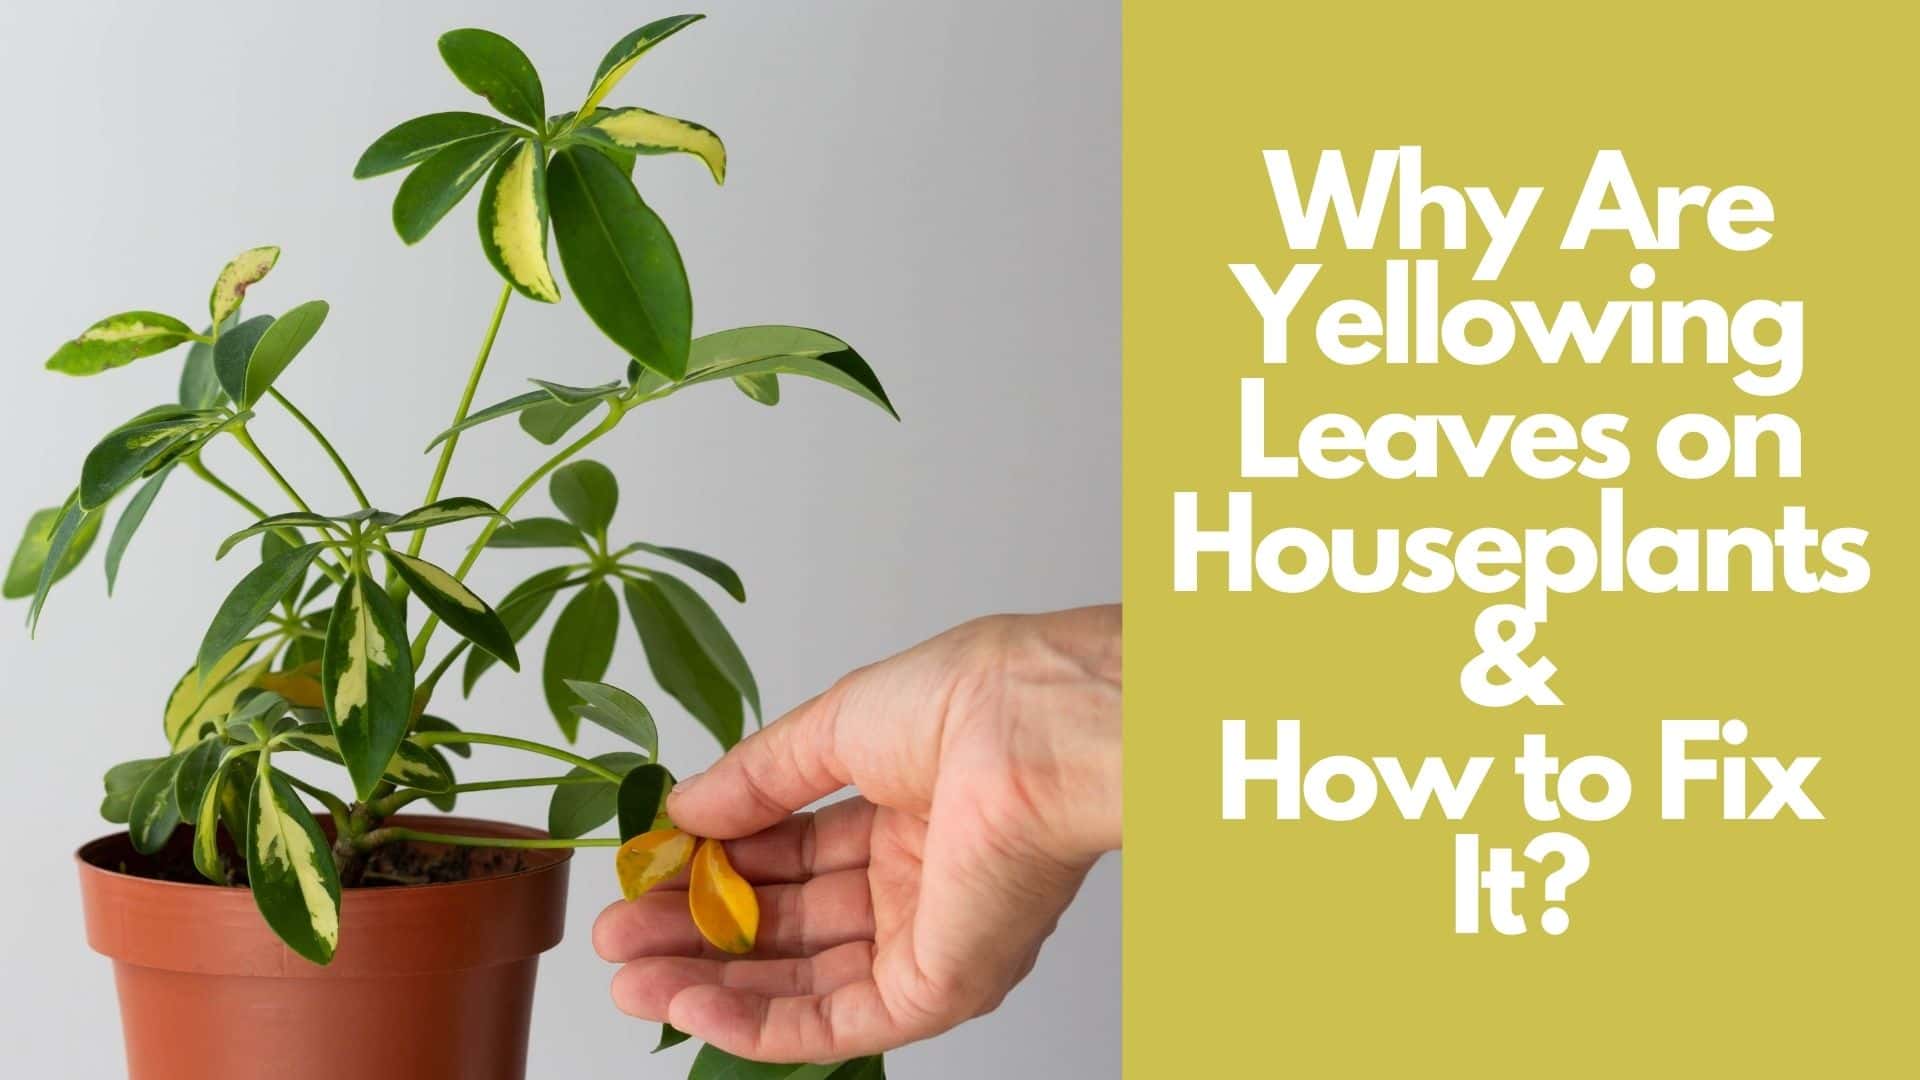 Why Are Yellowing Leaves on Houseplants & How to Fix It